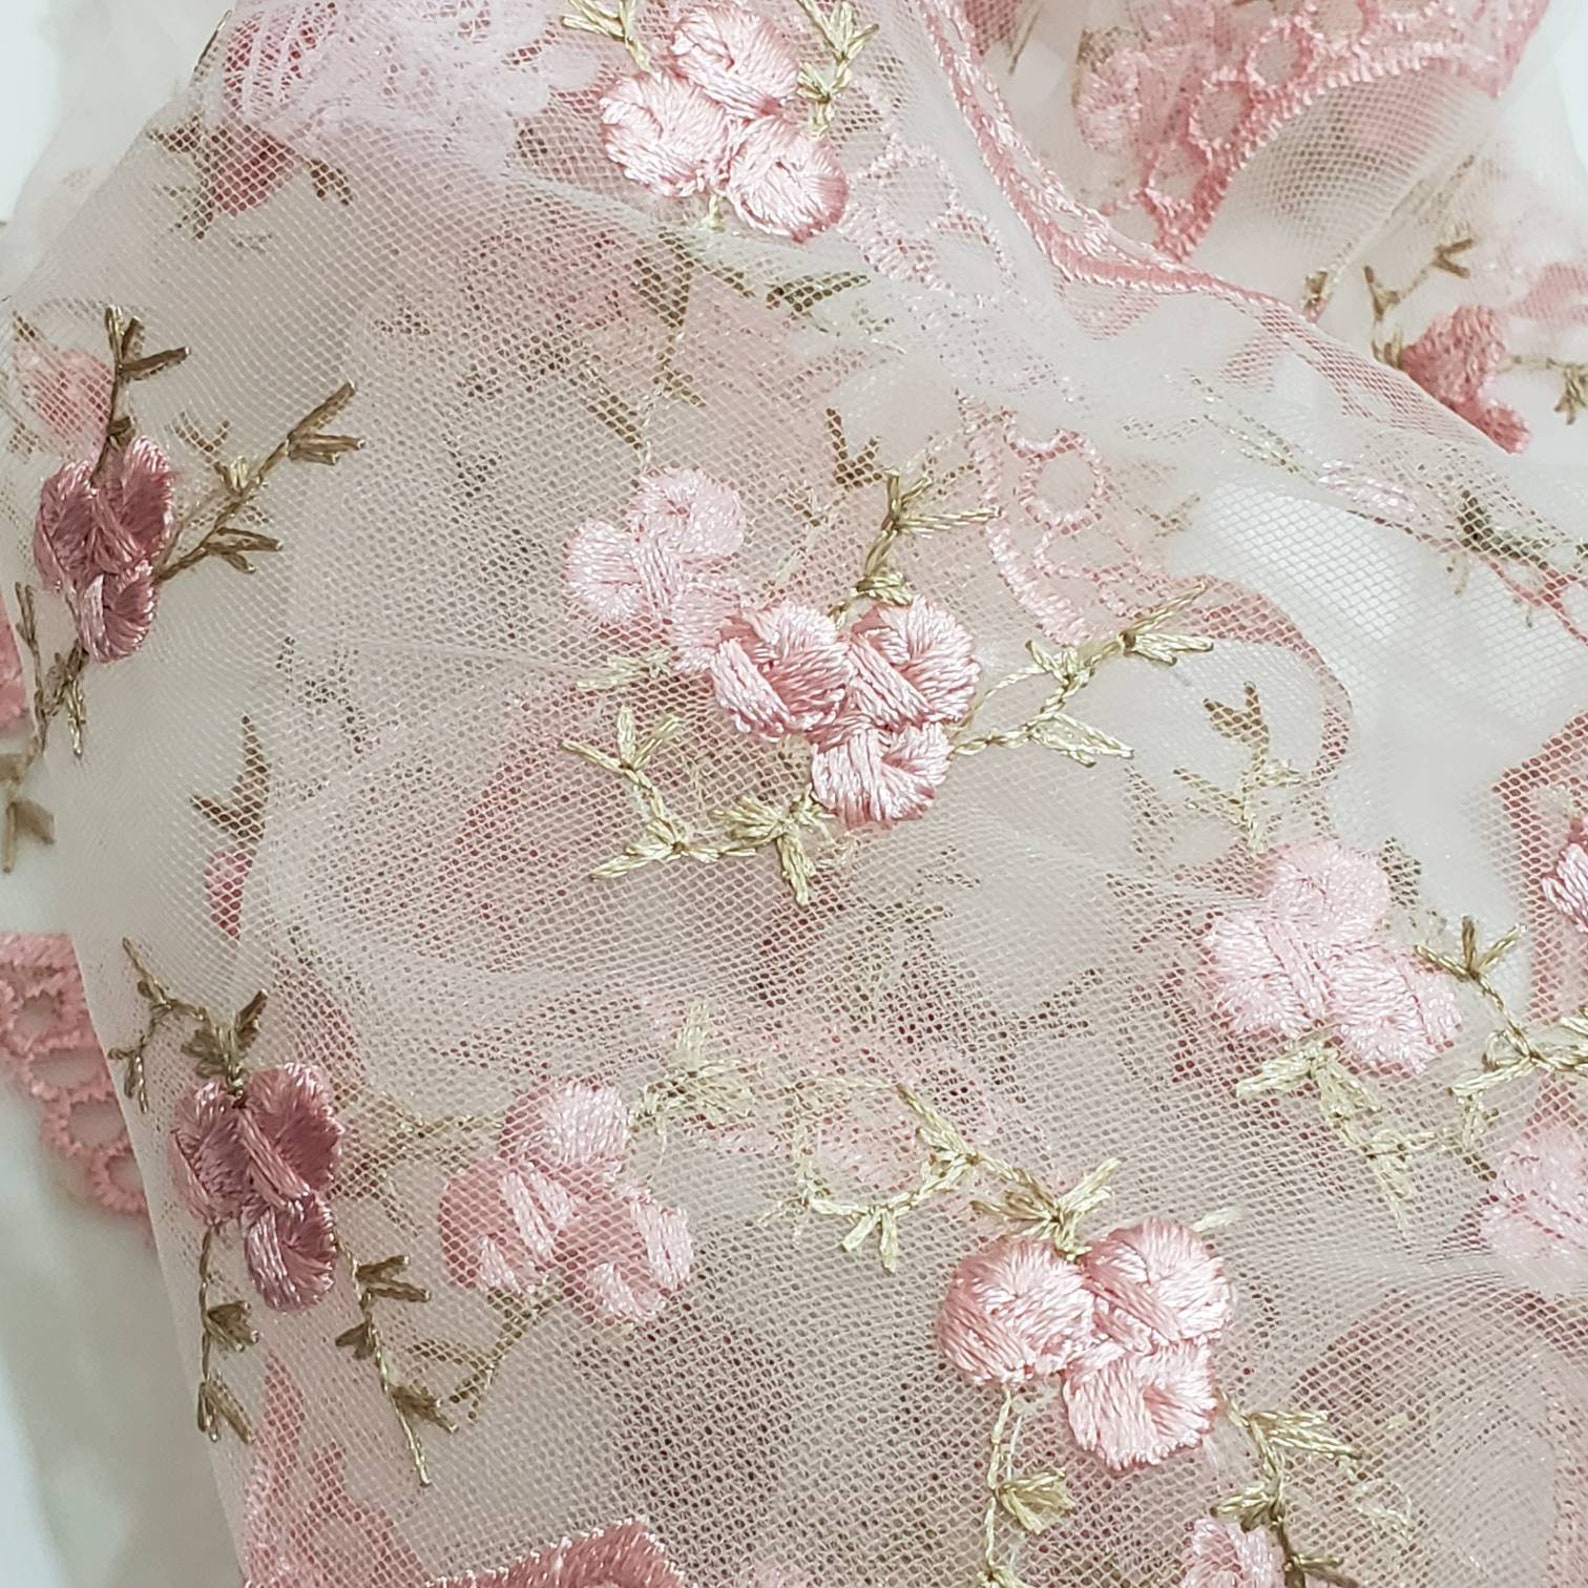 Embroidered Pink Mesh Floral Lace Trim. Scallop on Both Sides | Etsy